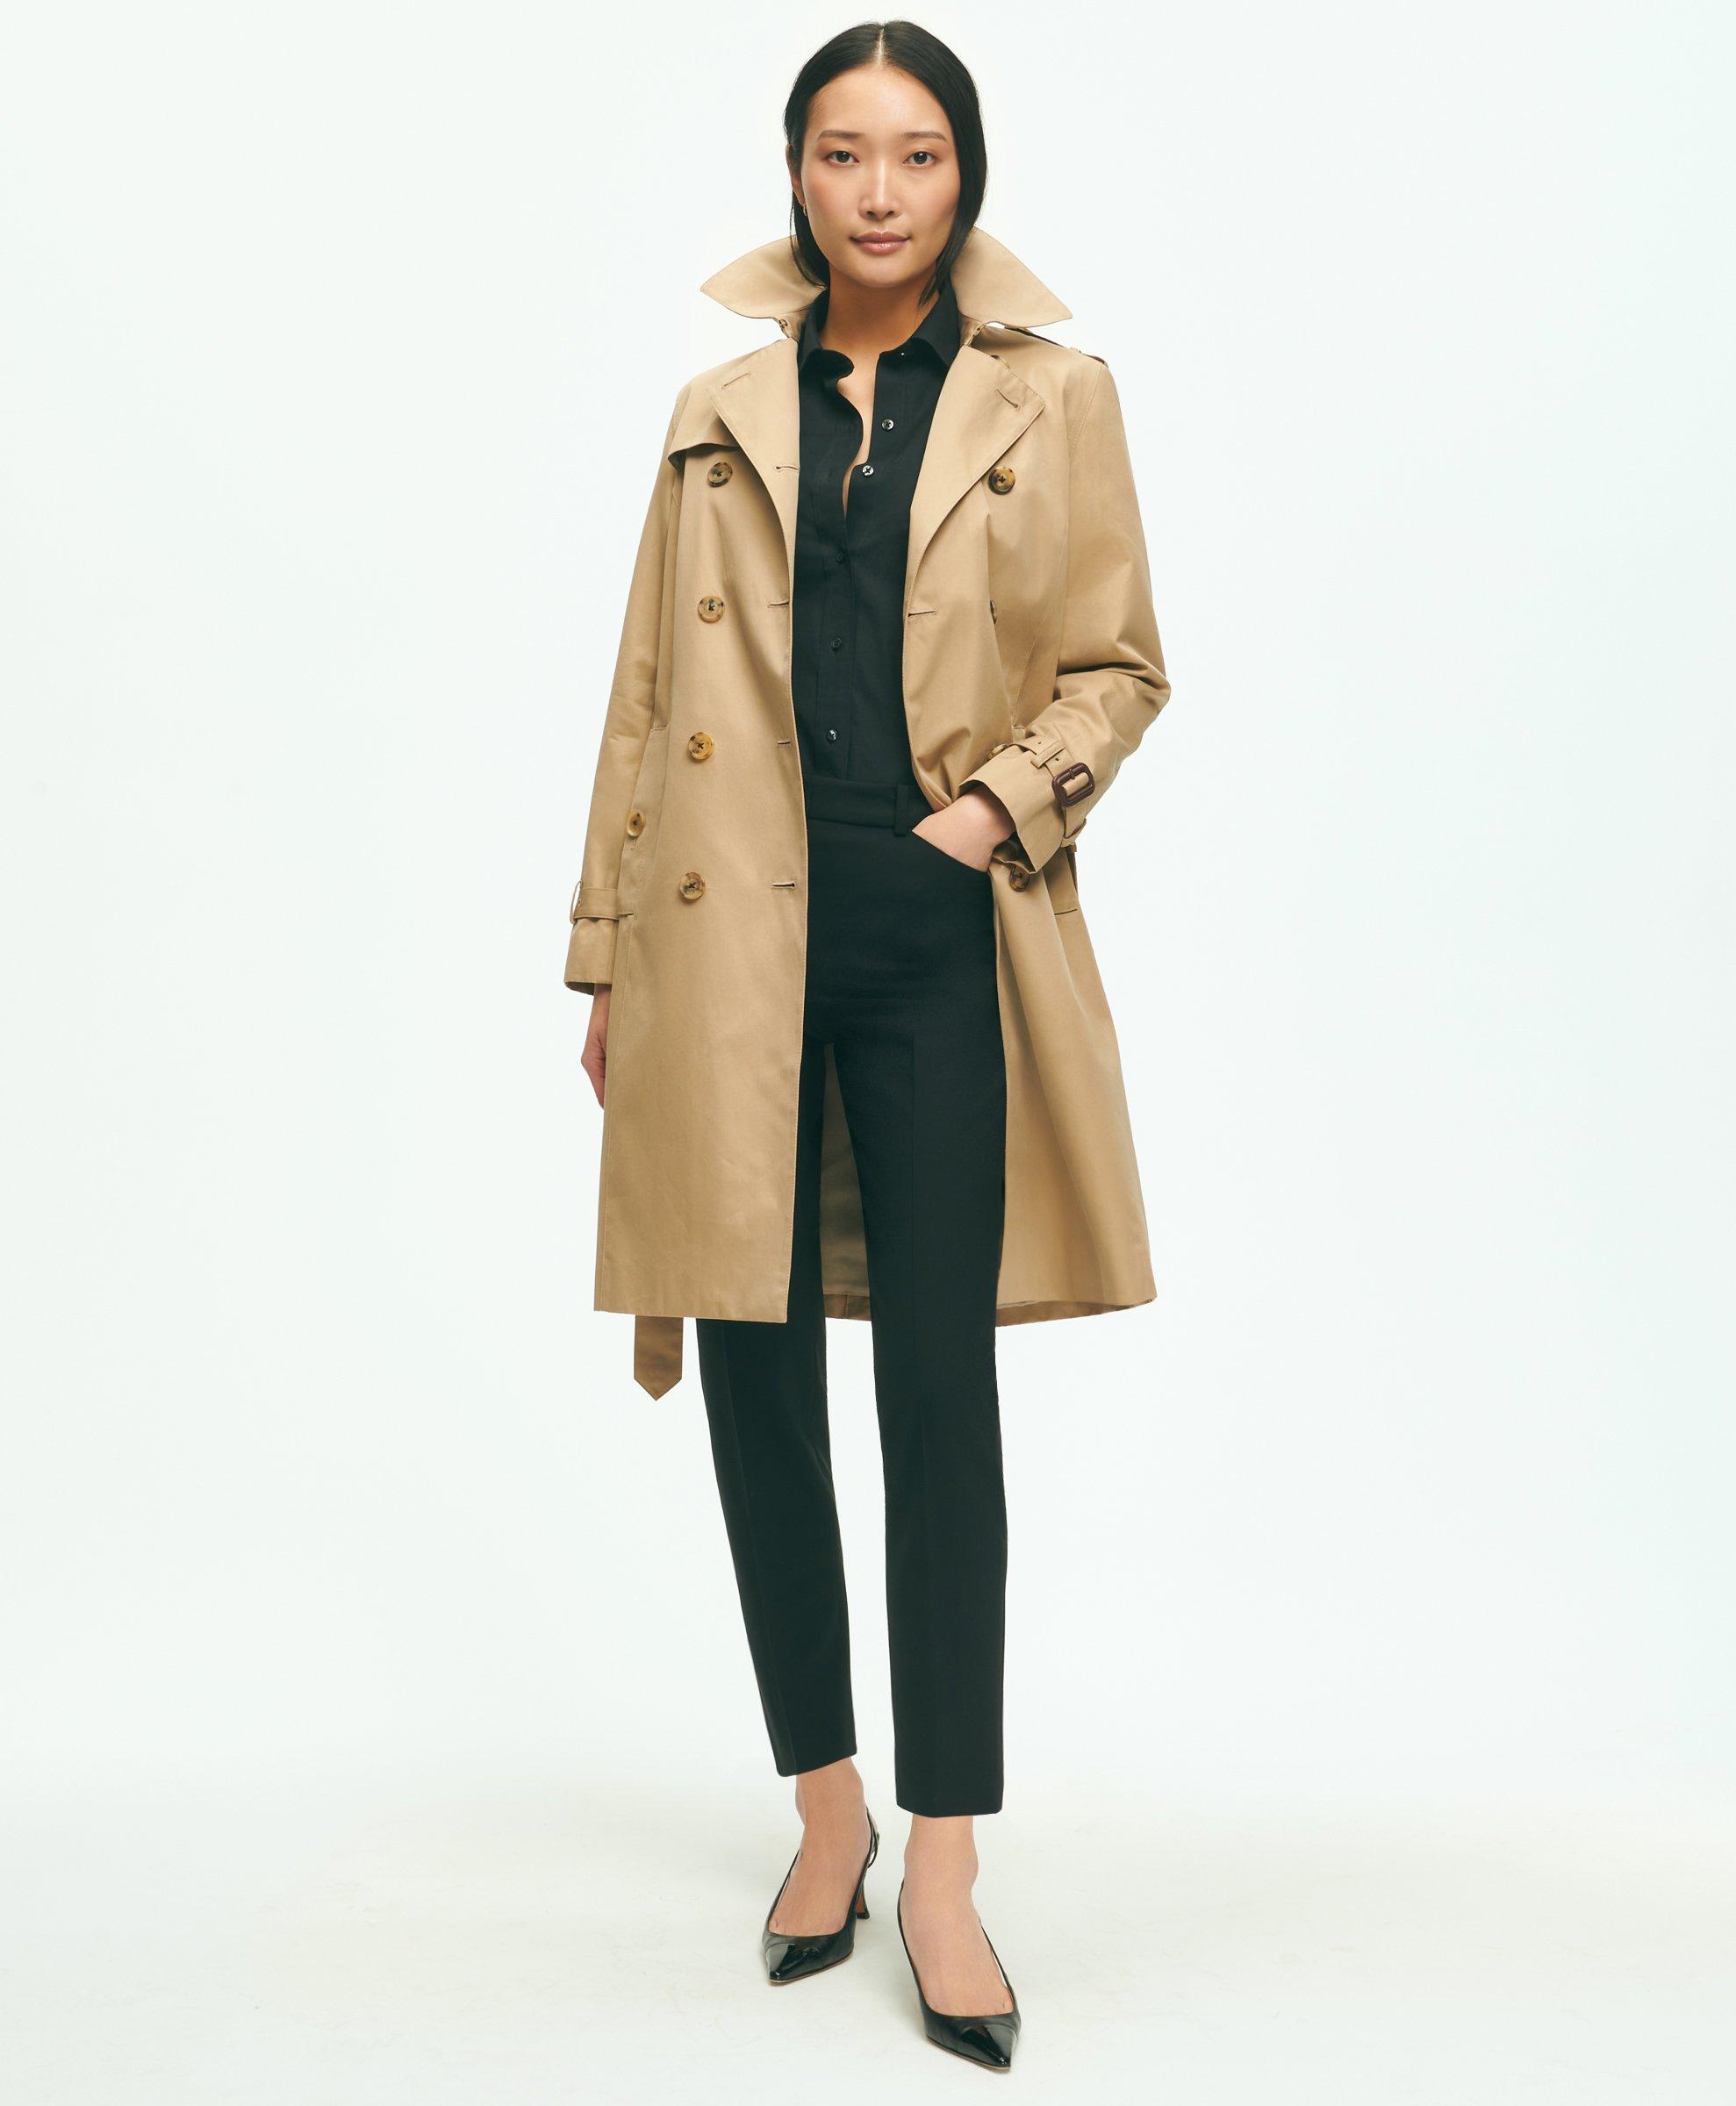 Brooks Brothers Women's Cotton Trench Coat | Khaki | Size 12 - Shop Holiday Gifts and Styles